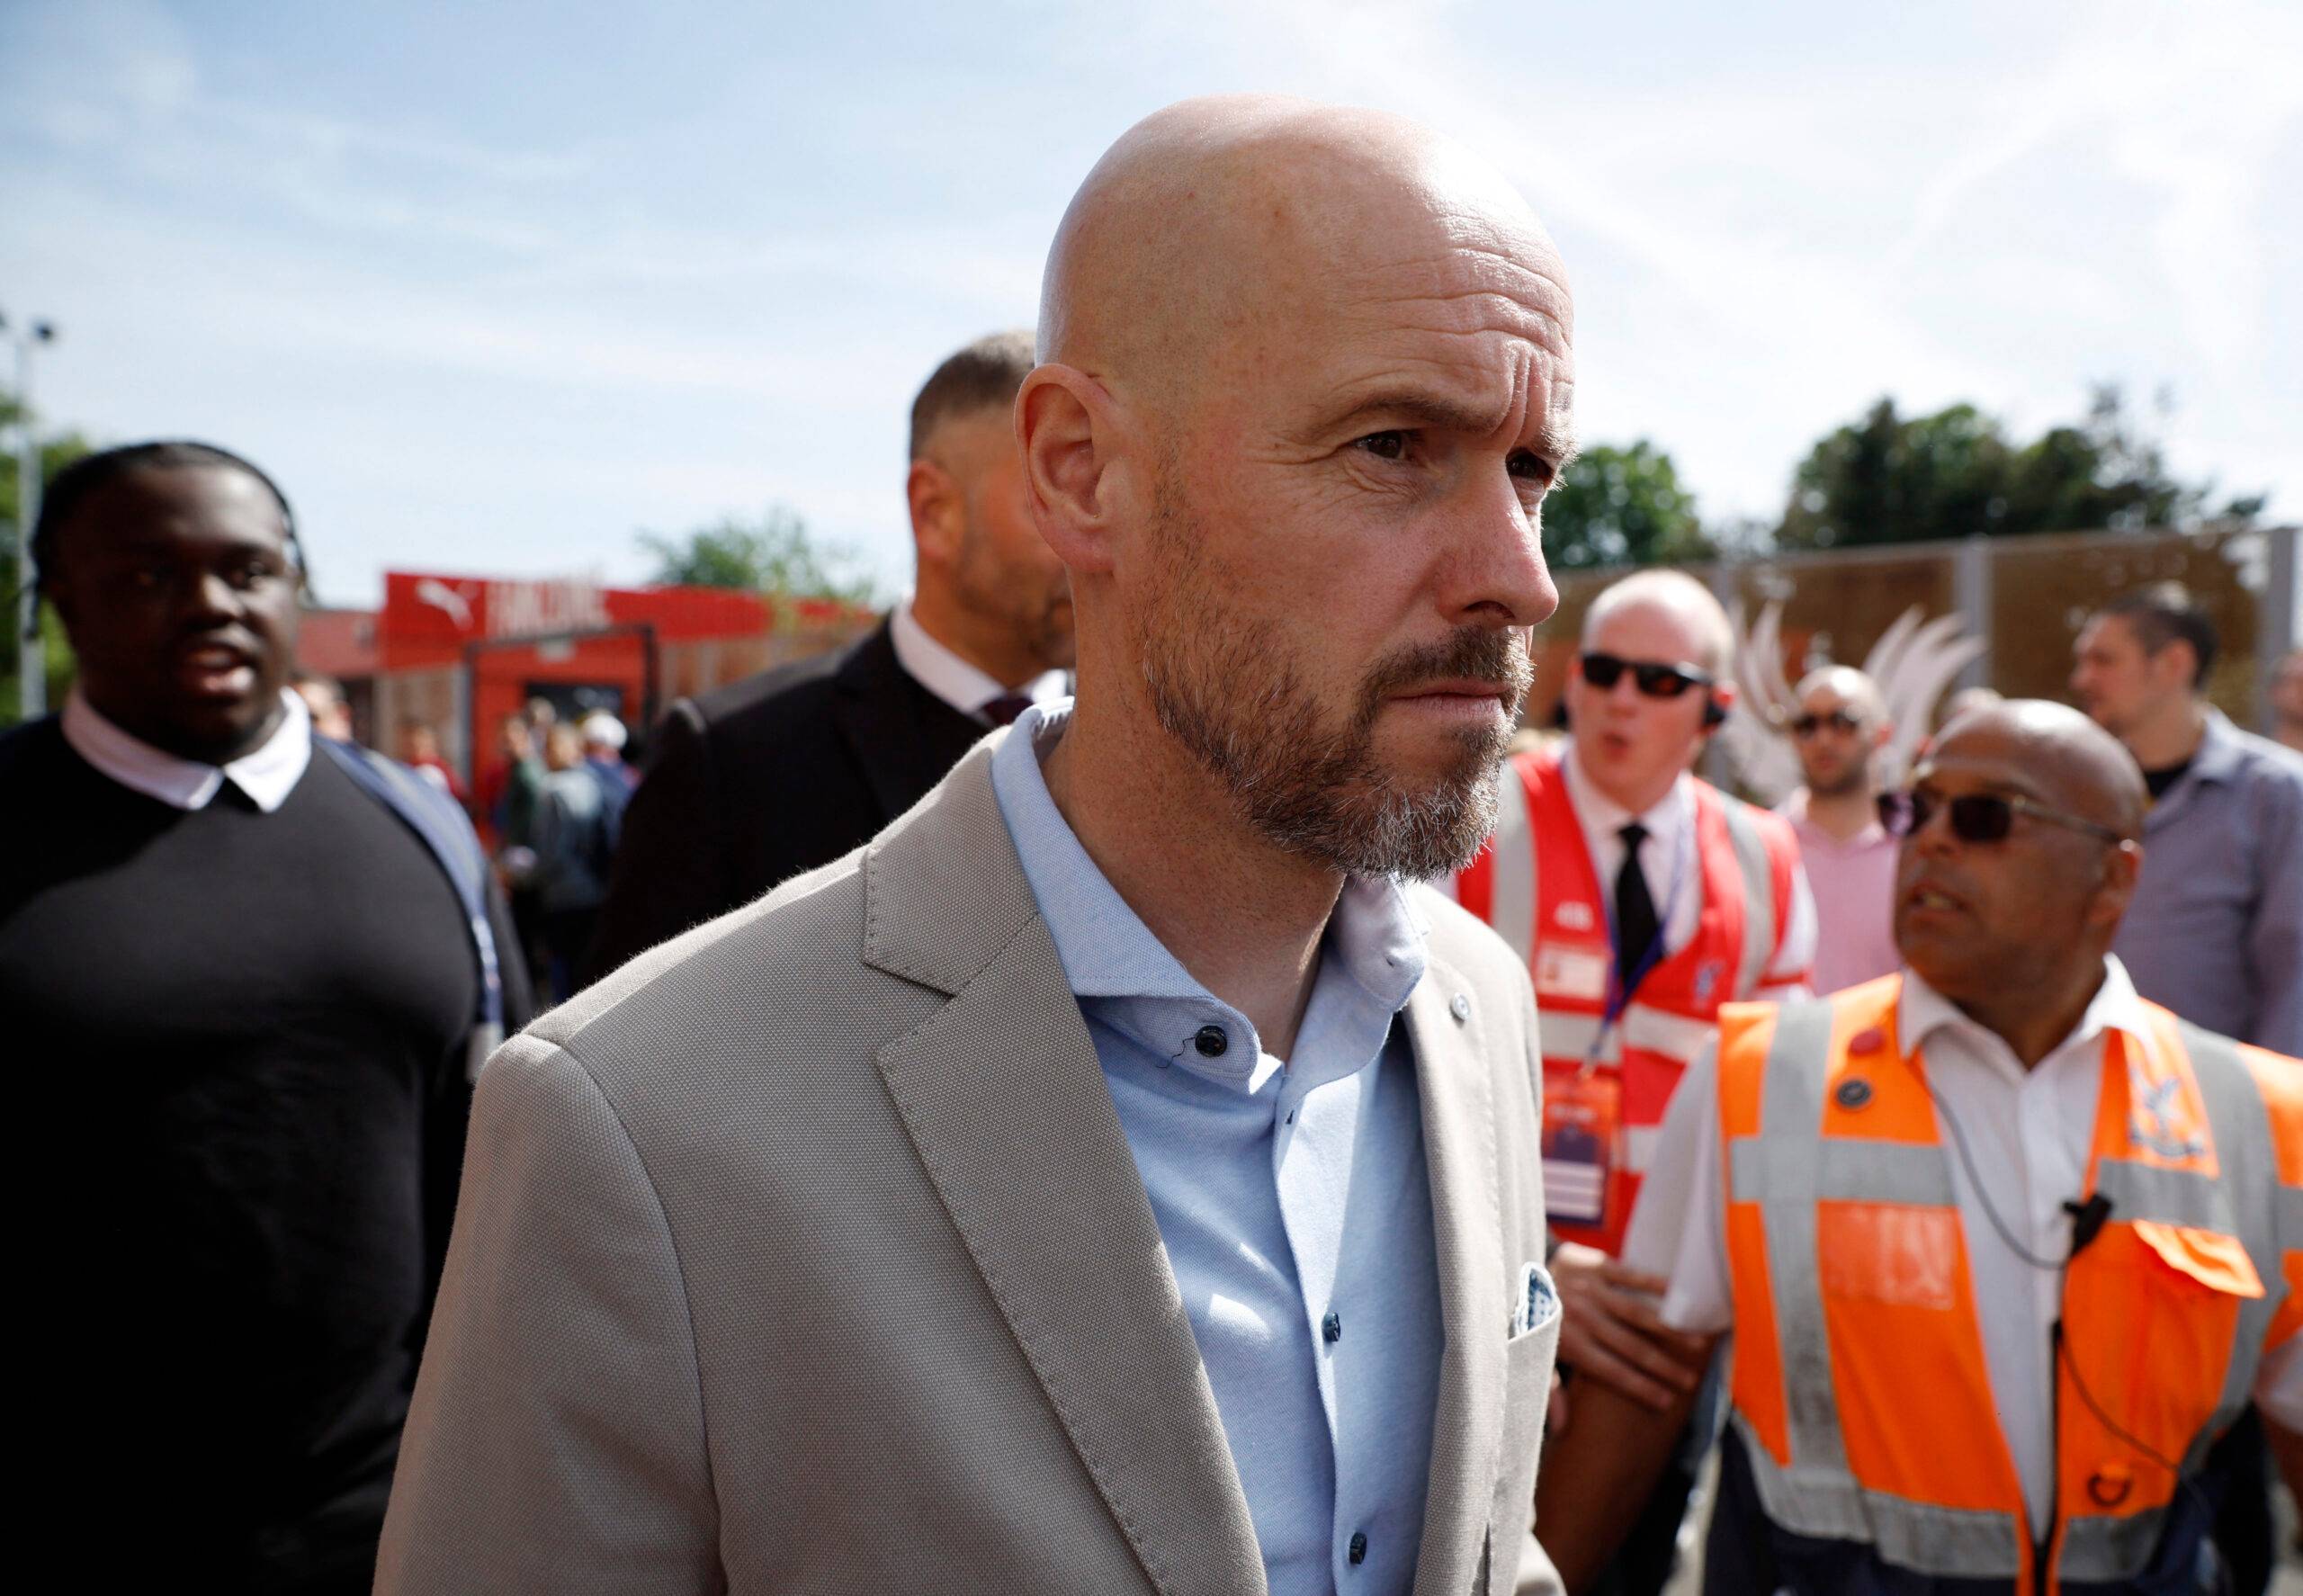 New Manchester United manager Erik ten Hag looking stern